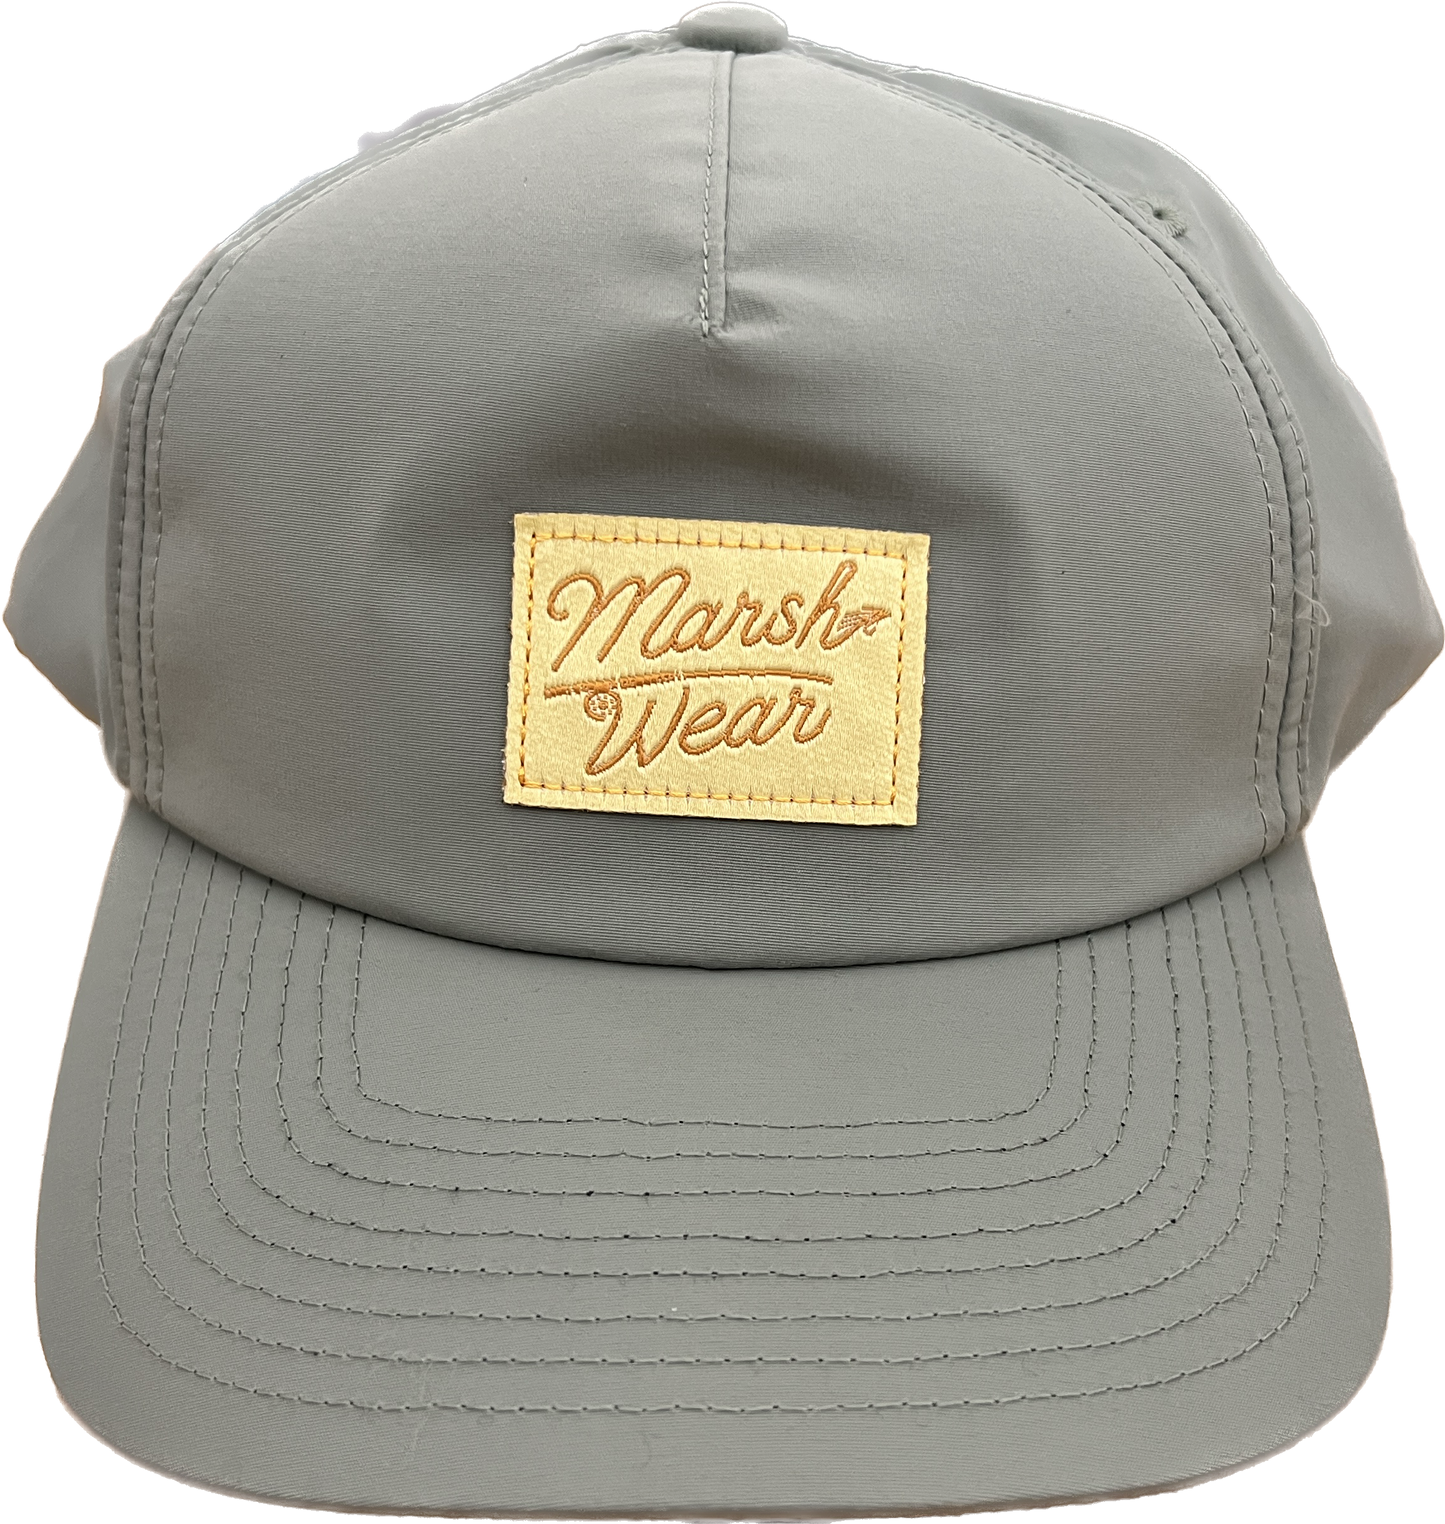 Marsh Wear Pitch Hat Lily Pad